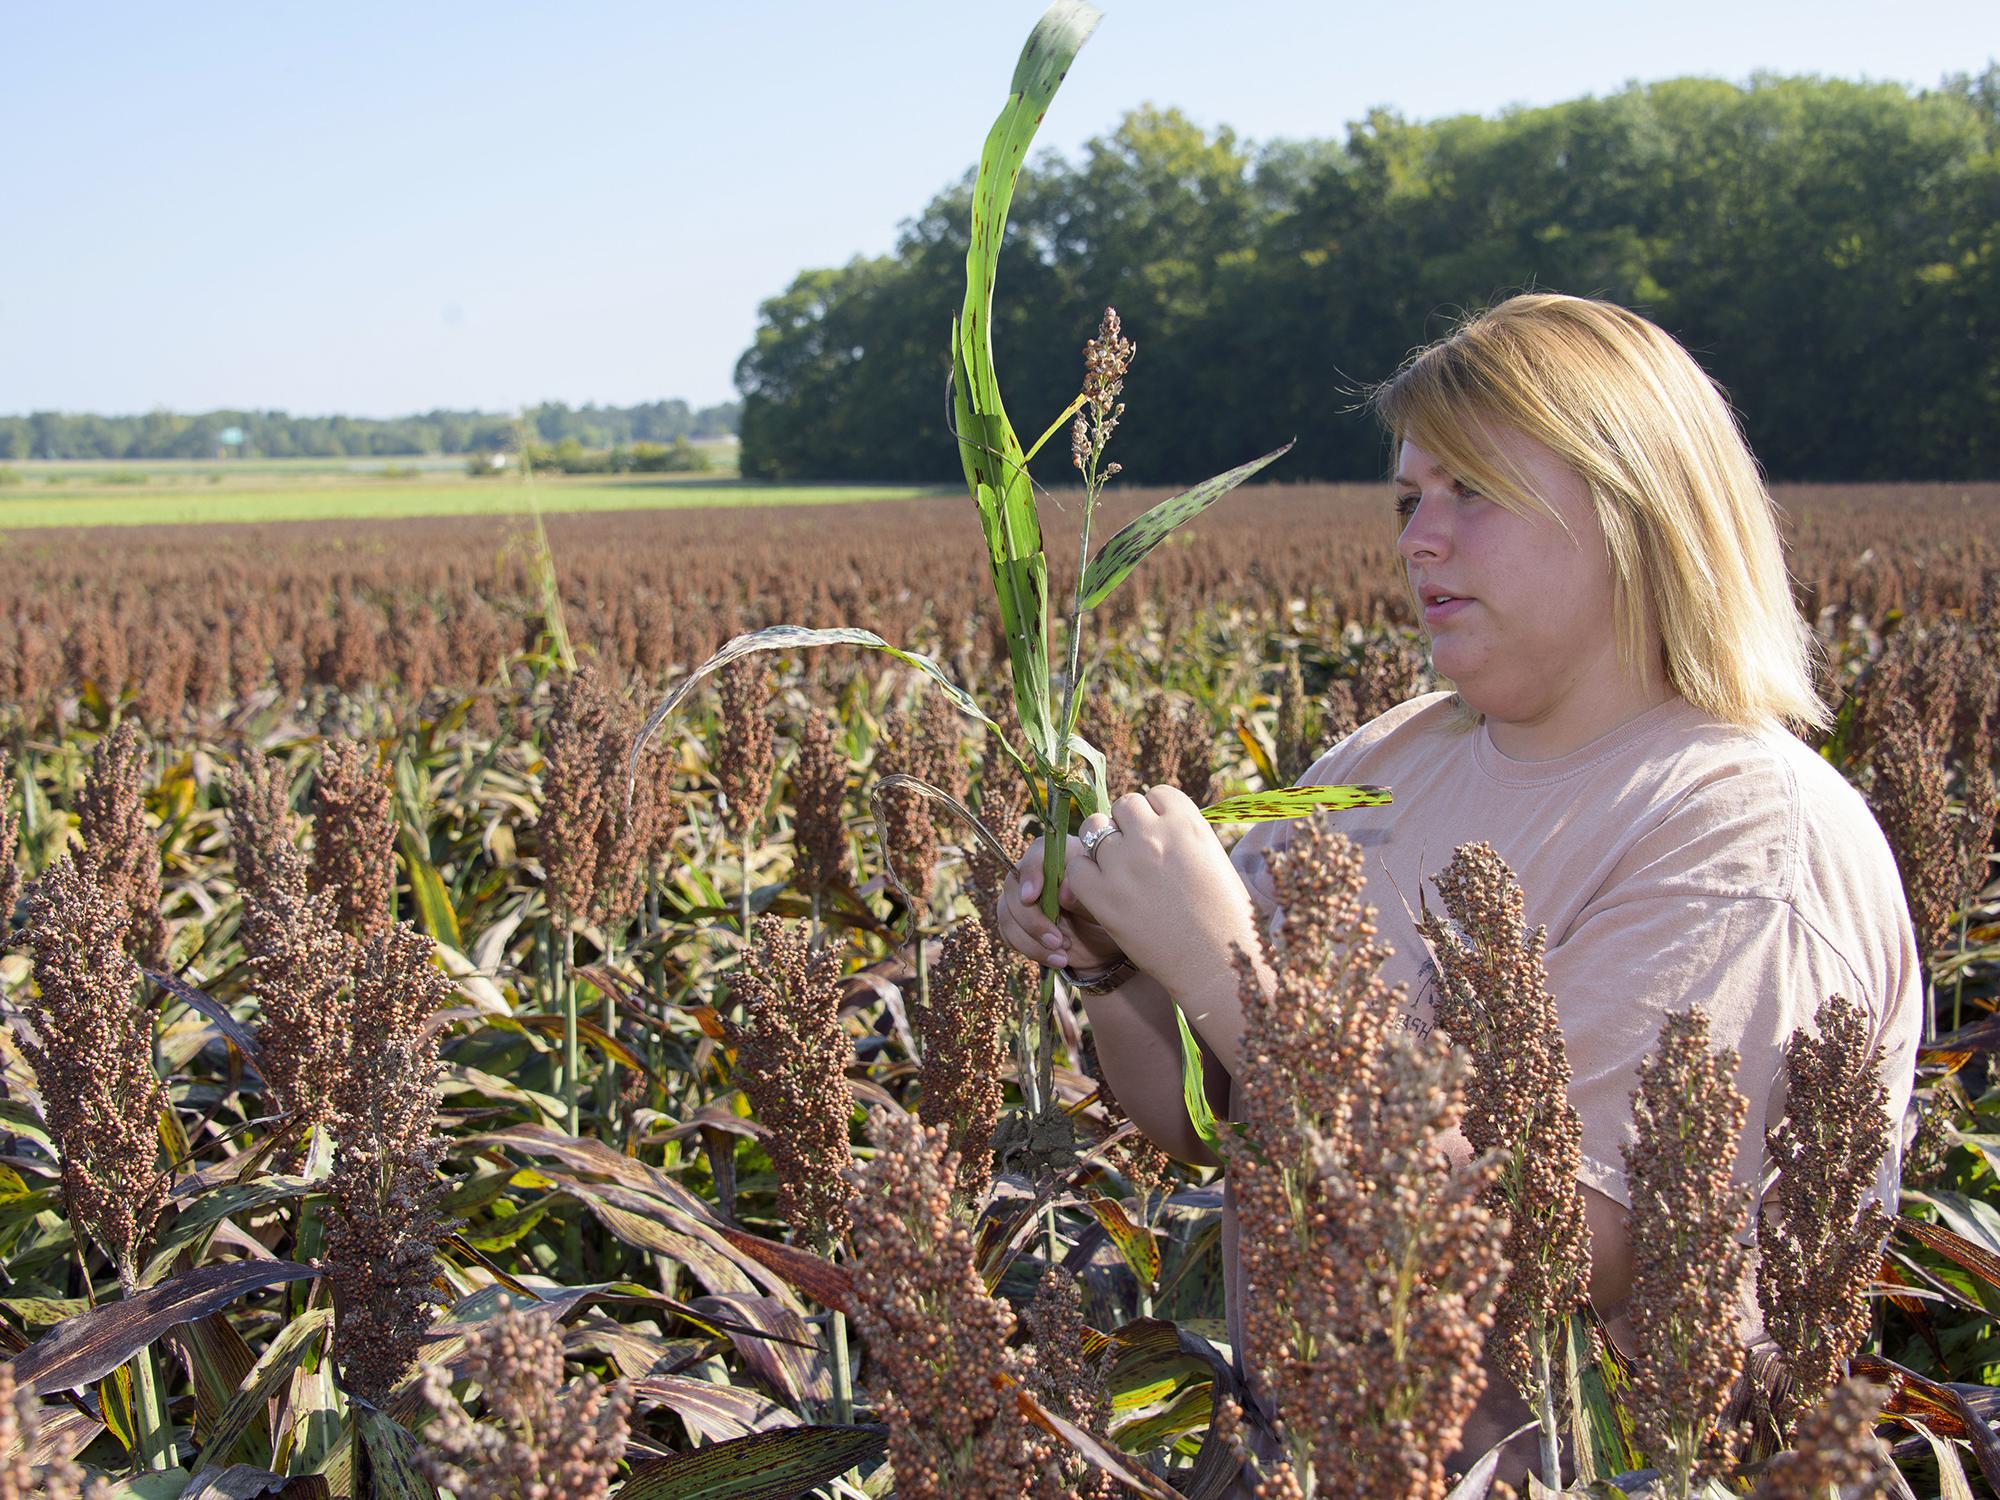 Brittany Lipsey, a Mississippi State University graduate student from Louisville, Mississippi, is researching management techniques that can be used to combat sugarcane aphids, helping sorghum farmers have a sustainable future with the crop. (Photo by MSU Extension Service/Kevin Hudson)